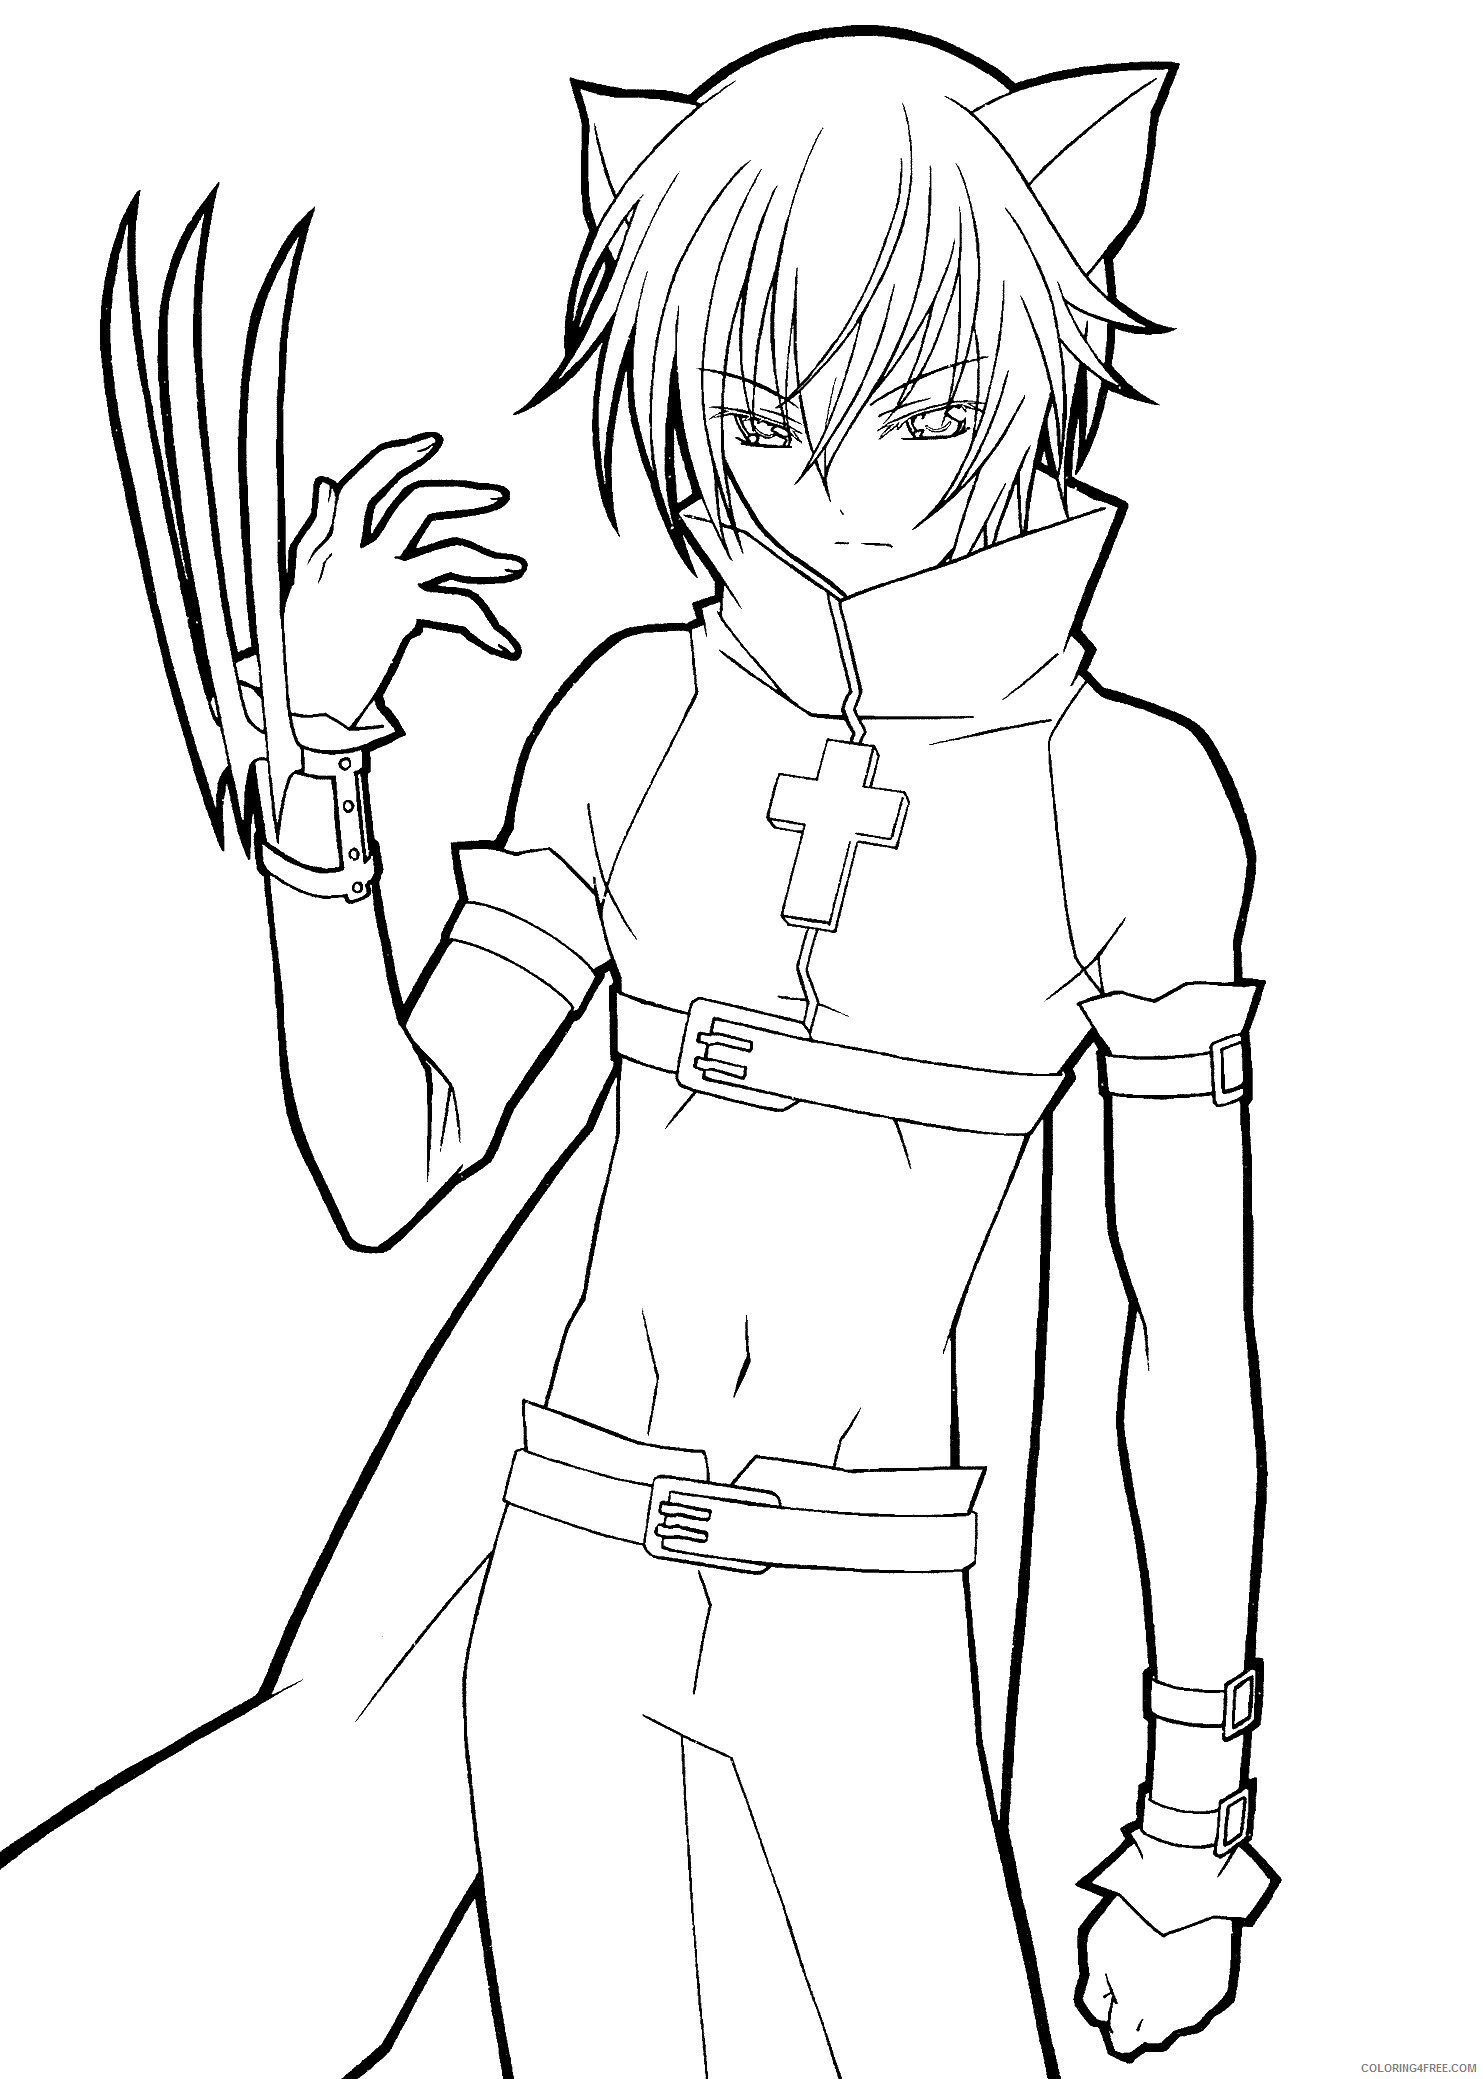 Anime Boys Coloring Pages Printable Sheets 30 Ideas for Anime Boys 2021 a 1270 Coloring4free